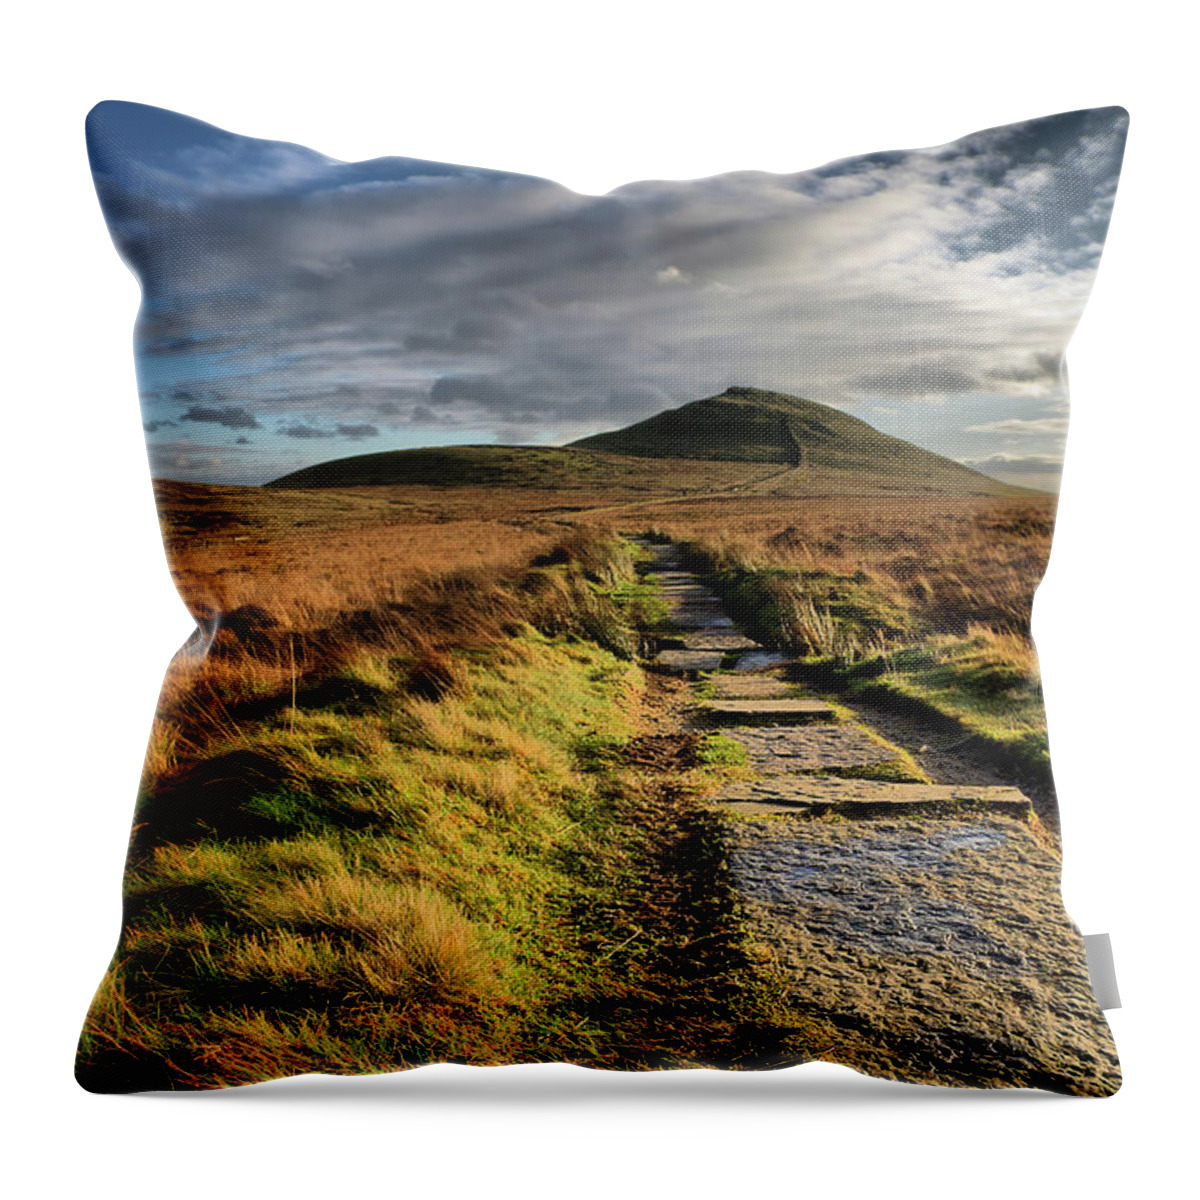 Peak District National Park Throw Pillow featuring the photograph Shutlingsloe Hill by James Ennis